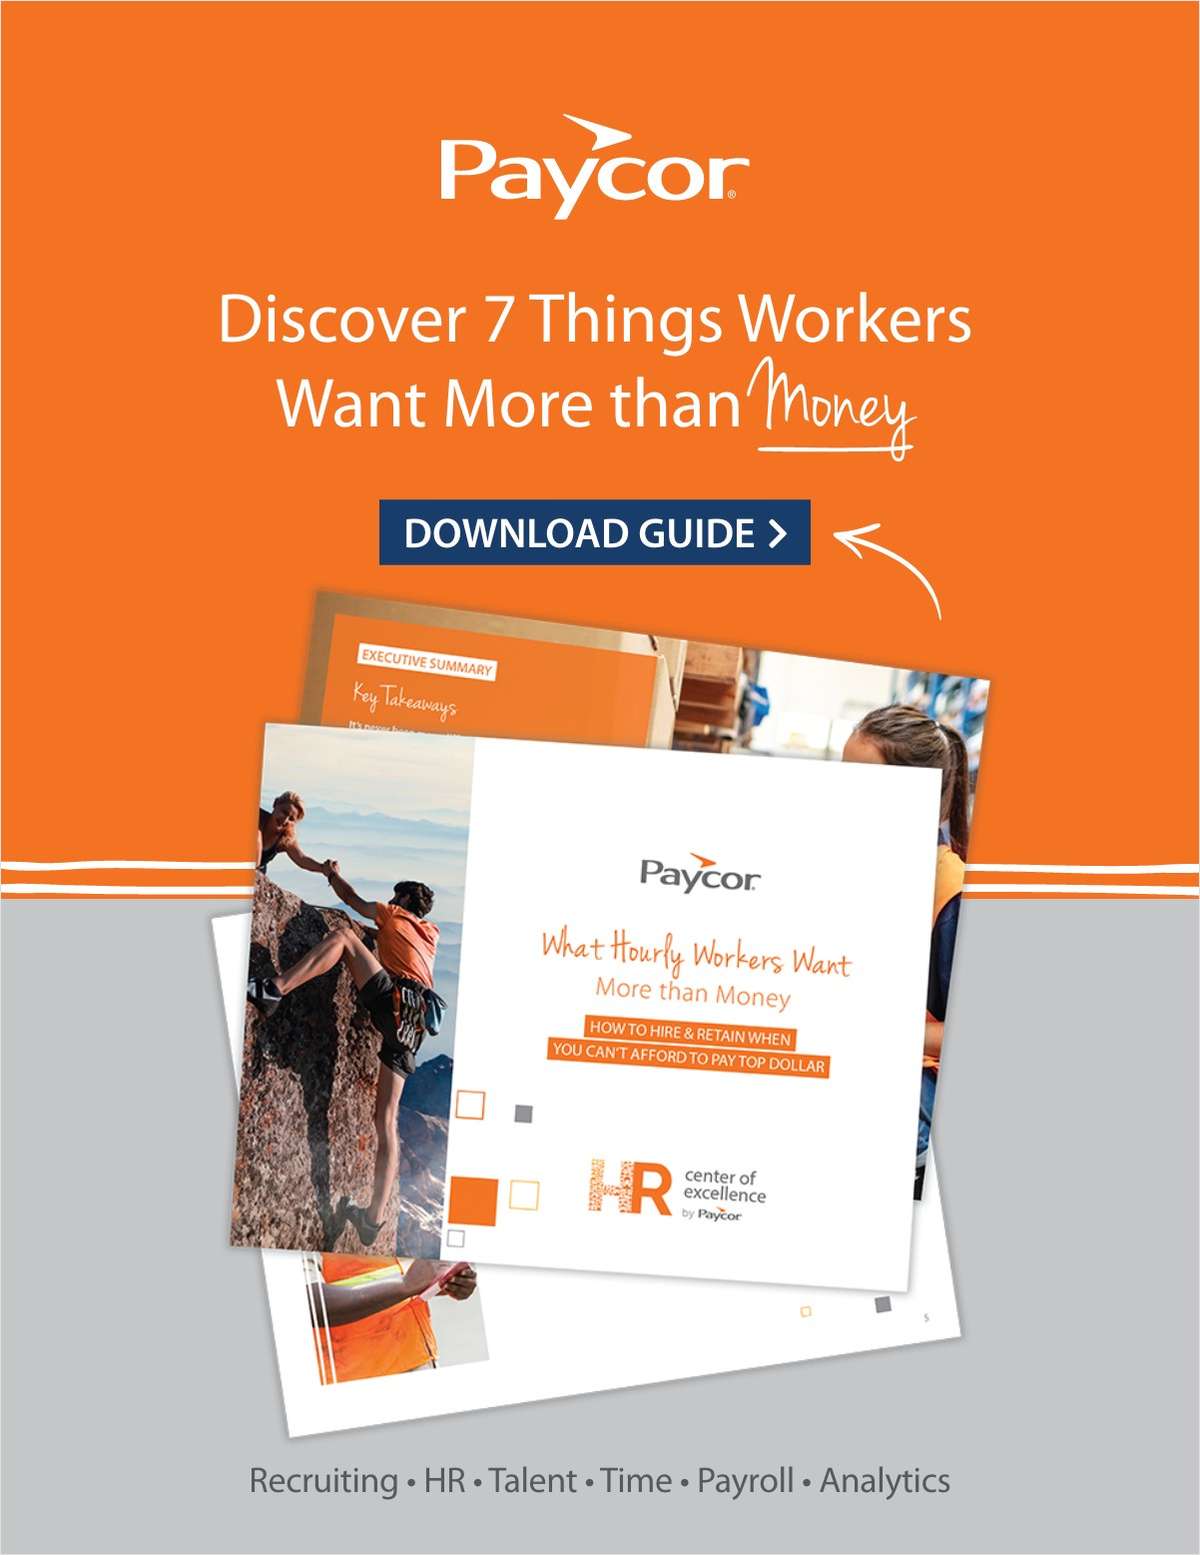 Discover 7 Things Workers Want More Than Money